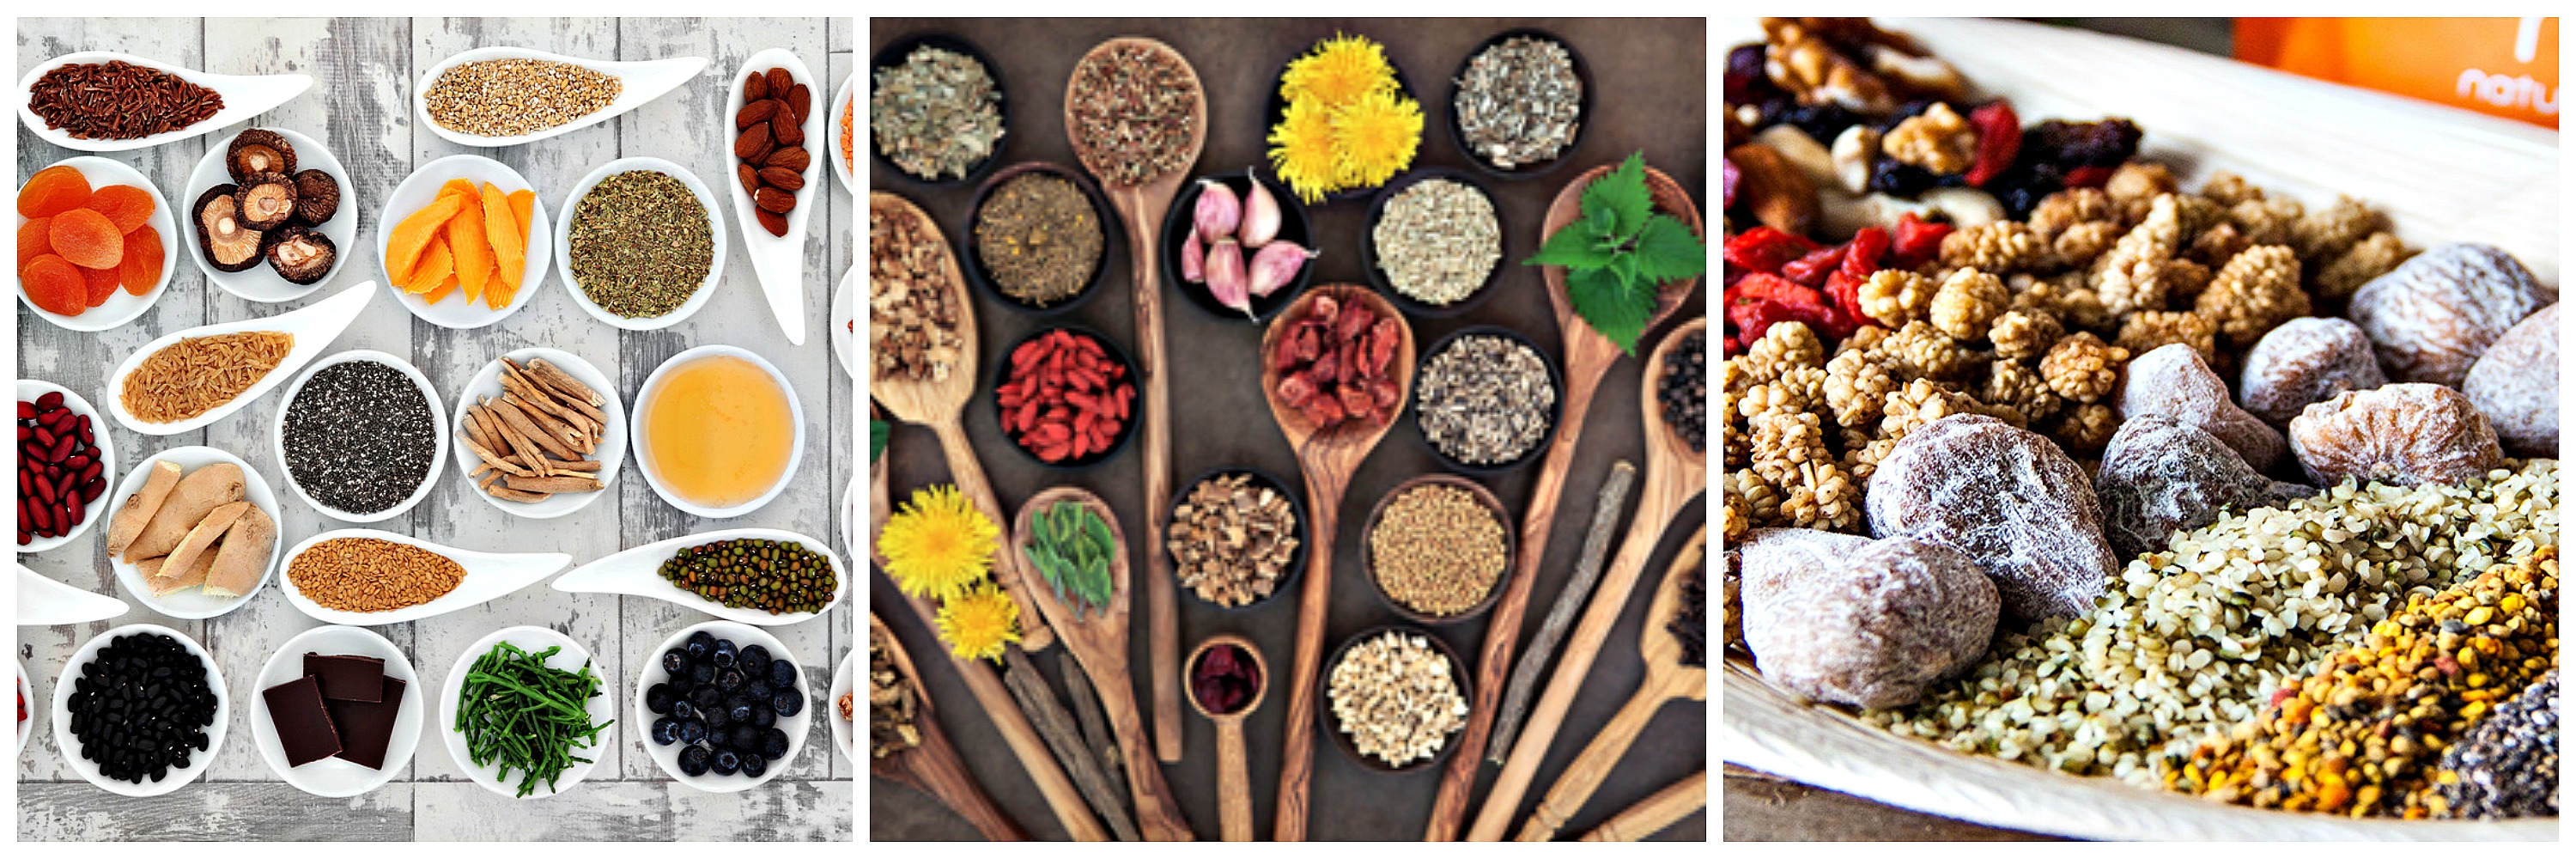 Selection of Superfoods